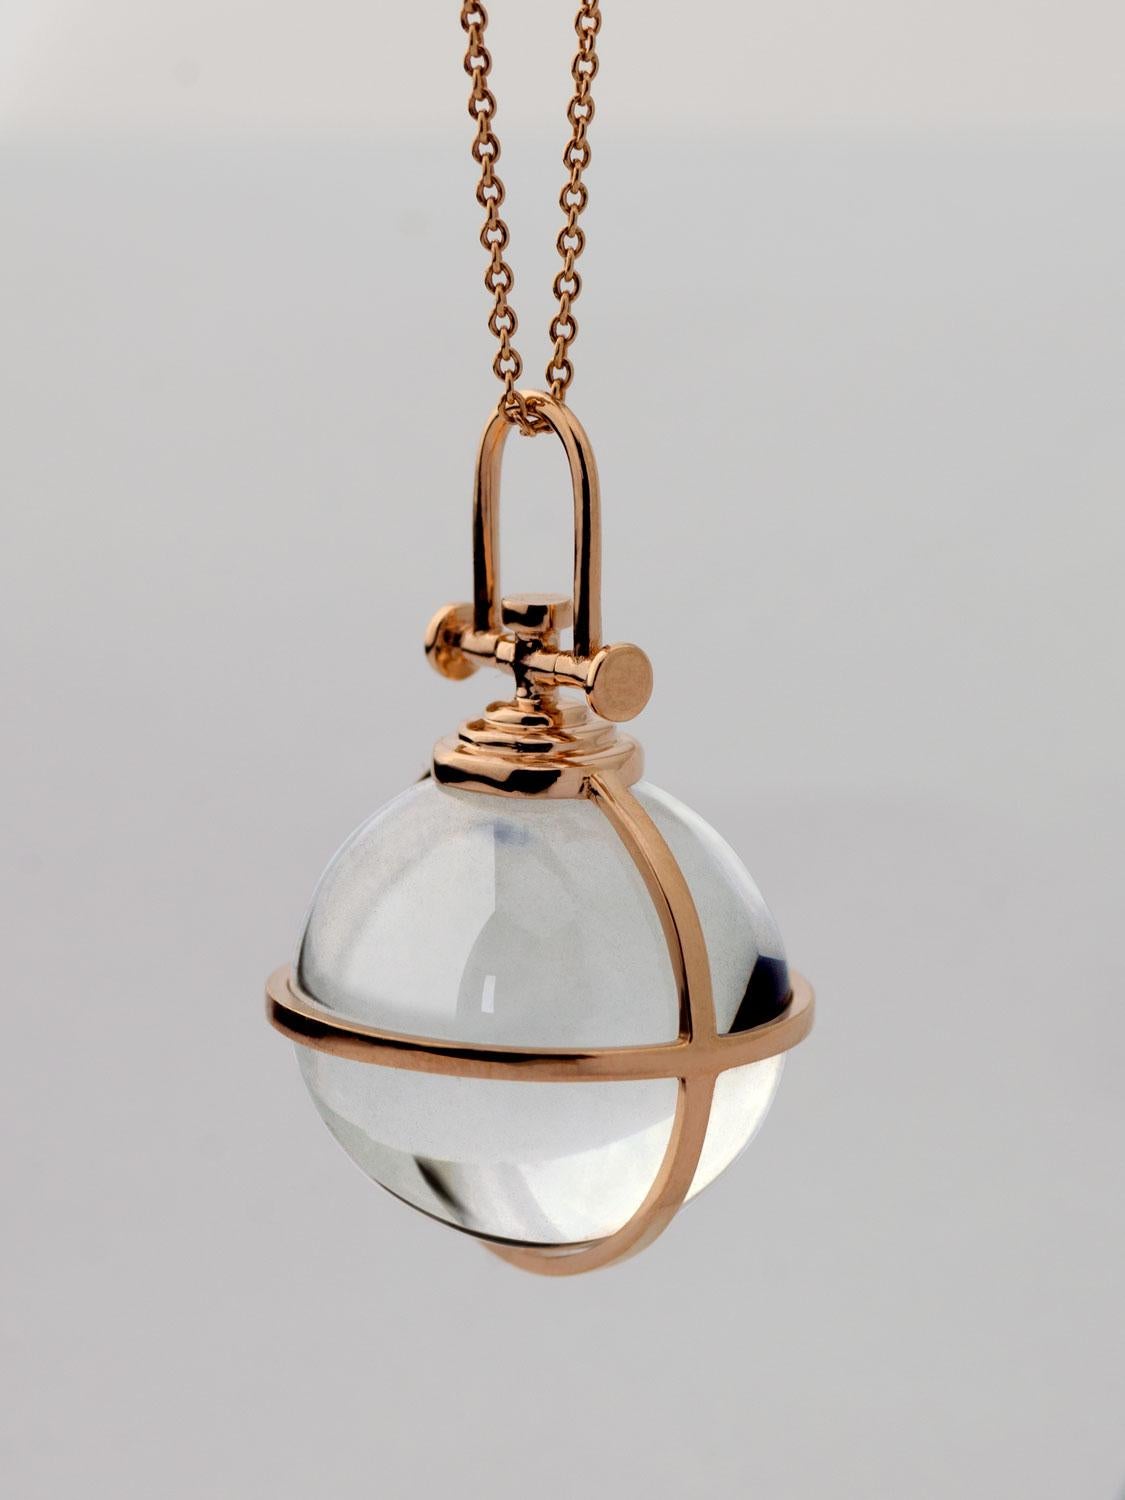 Rebecca Li designs Mindfulness. 
This bold crystal orb necklace is from her Crystal Ball Collection.

Pendant:
Metal Type: 18K Rose Gold
Gemstone: Rock Crystal
Pendant Size: 18 mm W * 18 mm D * 28 mm H
Gemstone Size: 16 mm W * 16 mm D * 16 mm